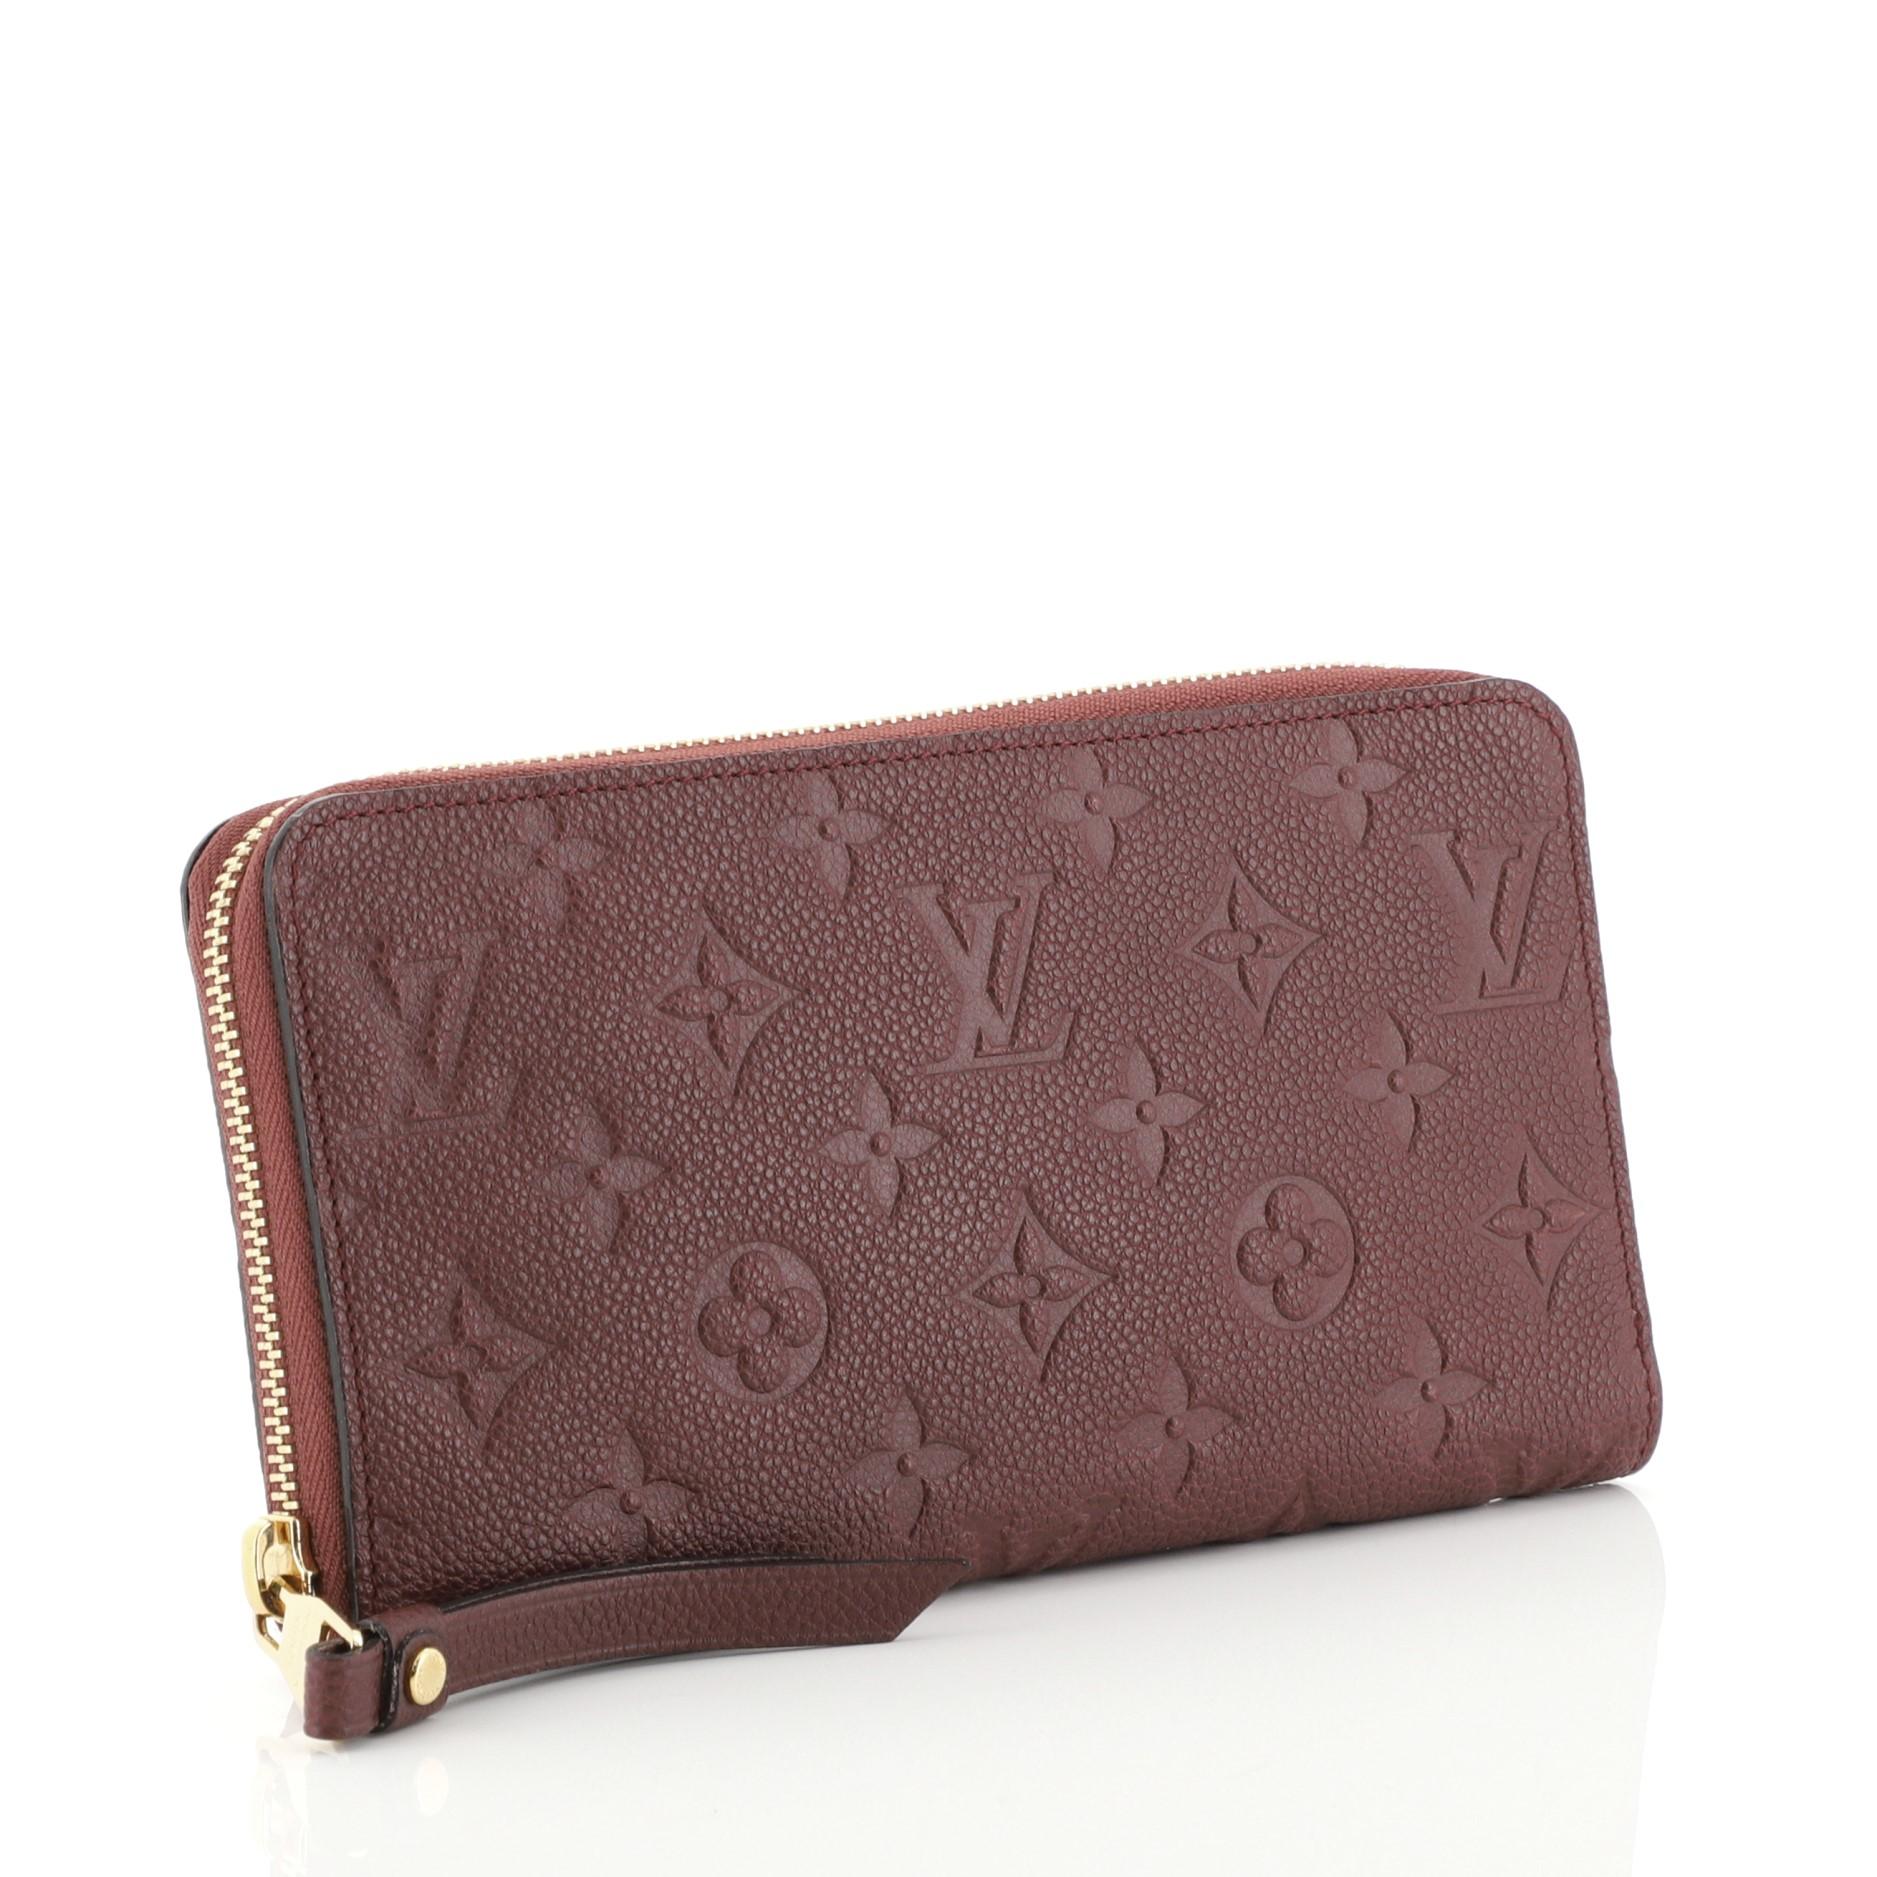 This Louis Vuitton Secret Wallet Monogram Empreinte Leather, crafted from red monogram empreinte leather, features gold-tone hardware. Its zip around closure opens to a red leather interior with multiple card slots and zip pocket. Authenticity code